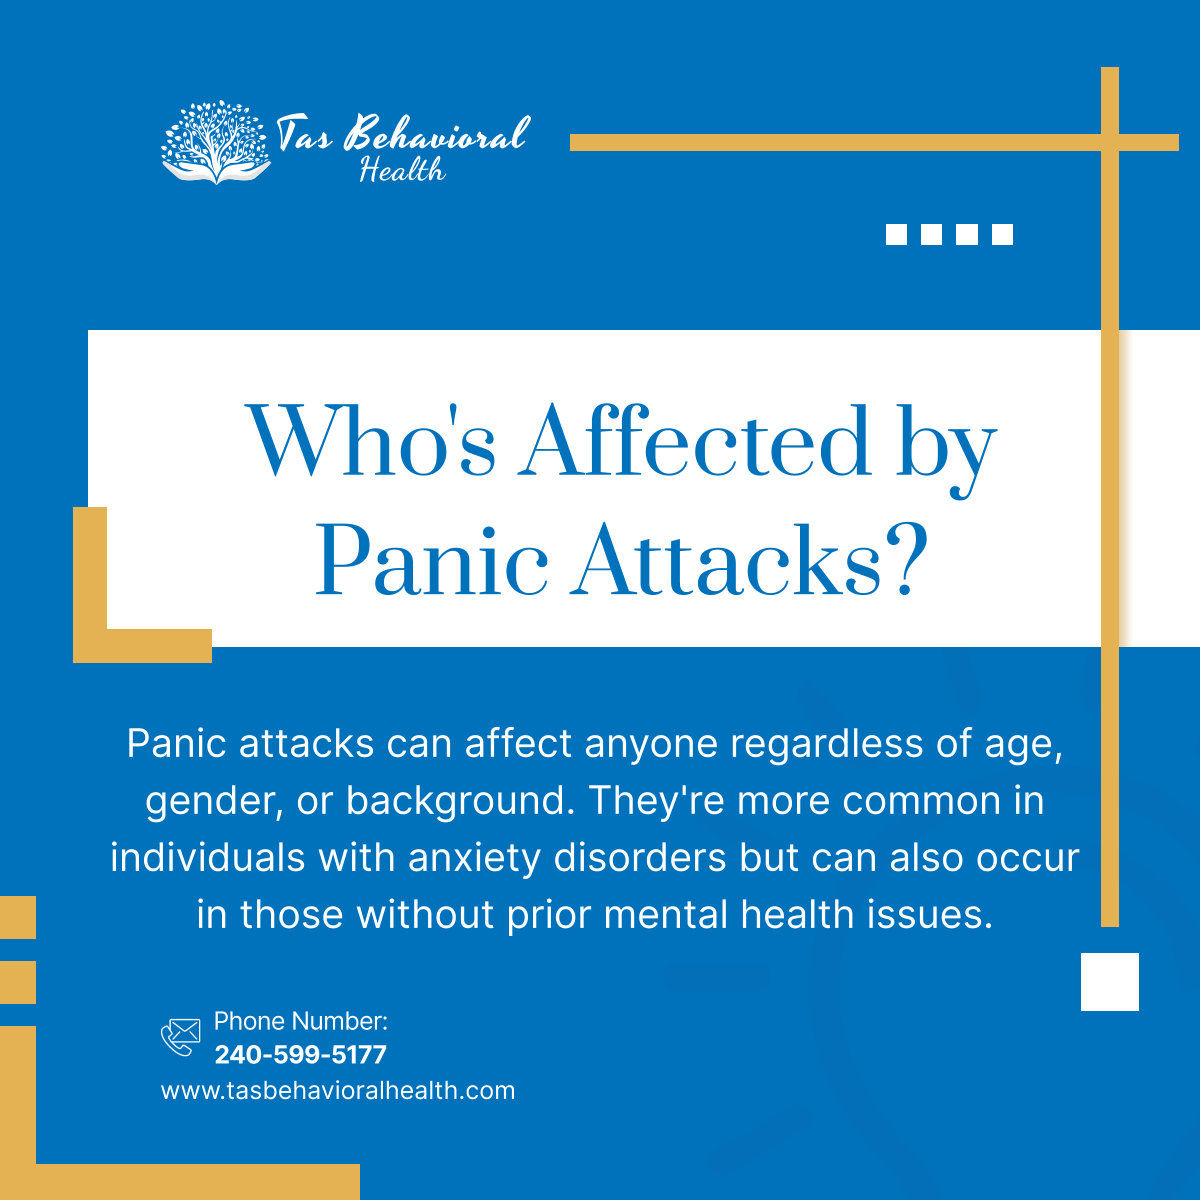 Panic attacks don't discriminate. Understanding their impact helps foster empathy and support for those struggling with this challenging experience. #CumberlandMD #MentalHealthClinic #PanicAttackAwareness